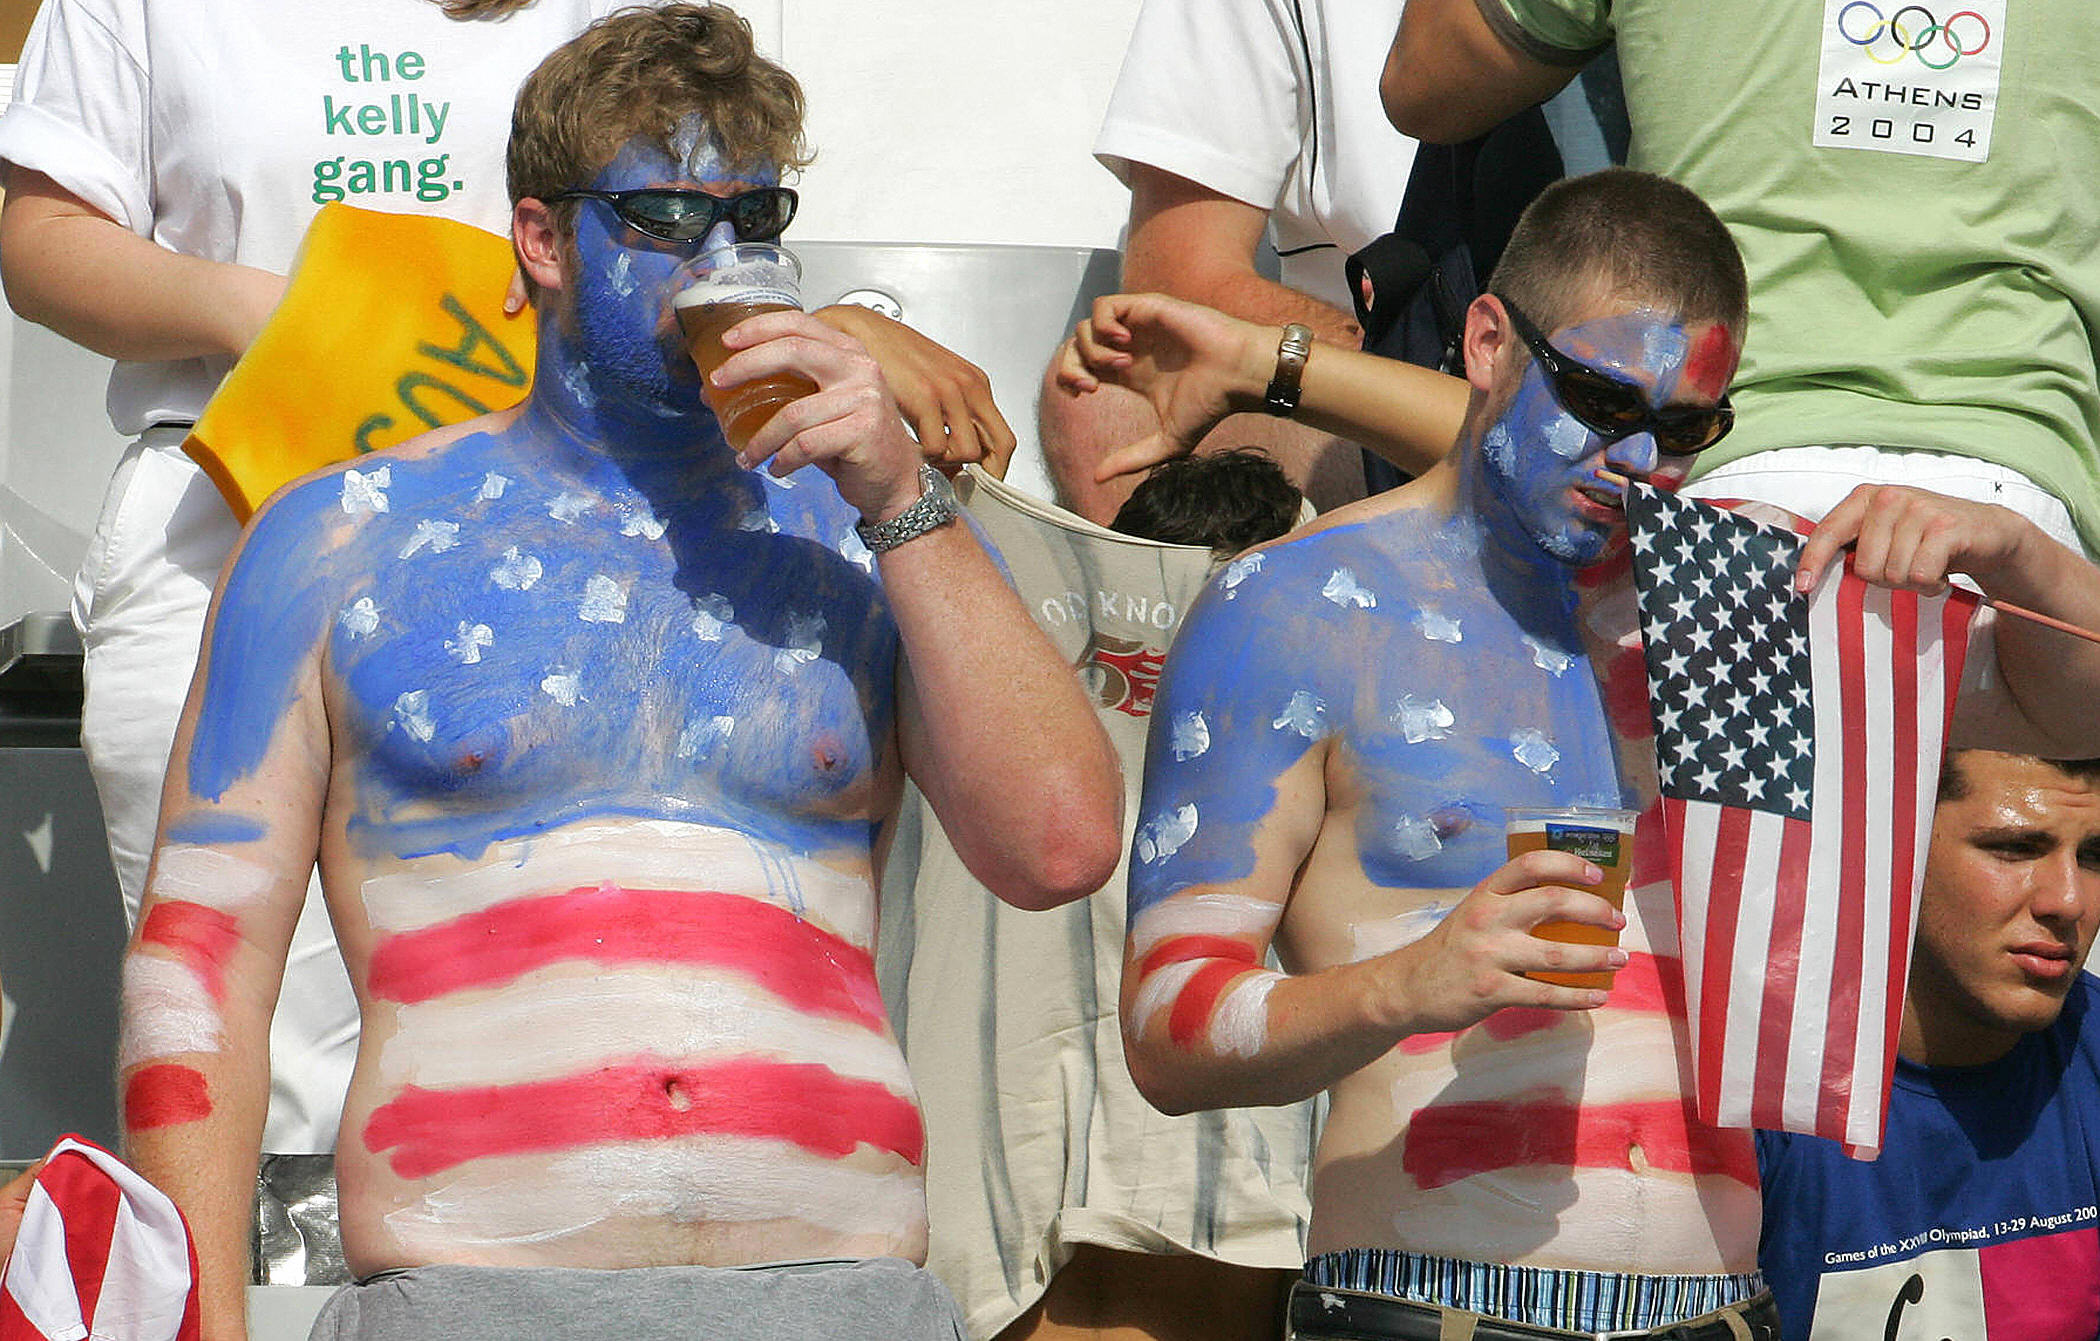 Drinking beer, American fans painted in